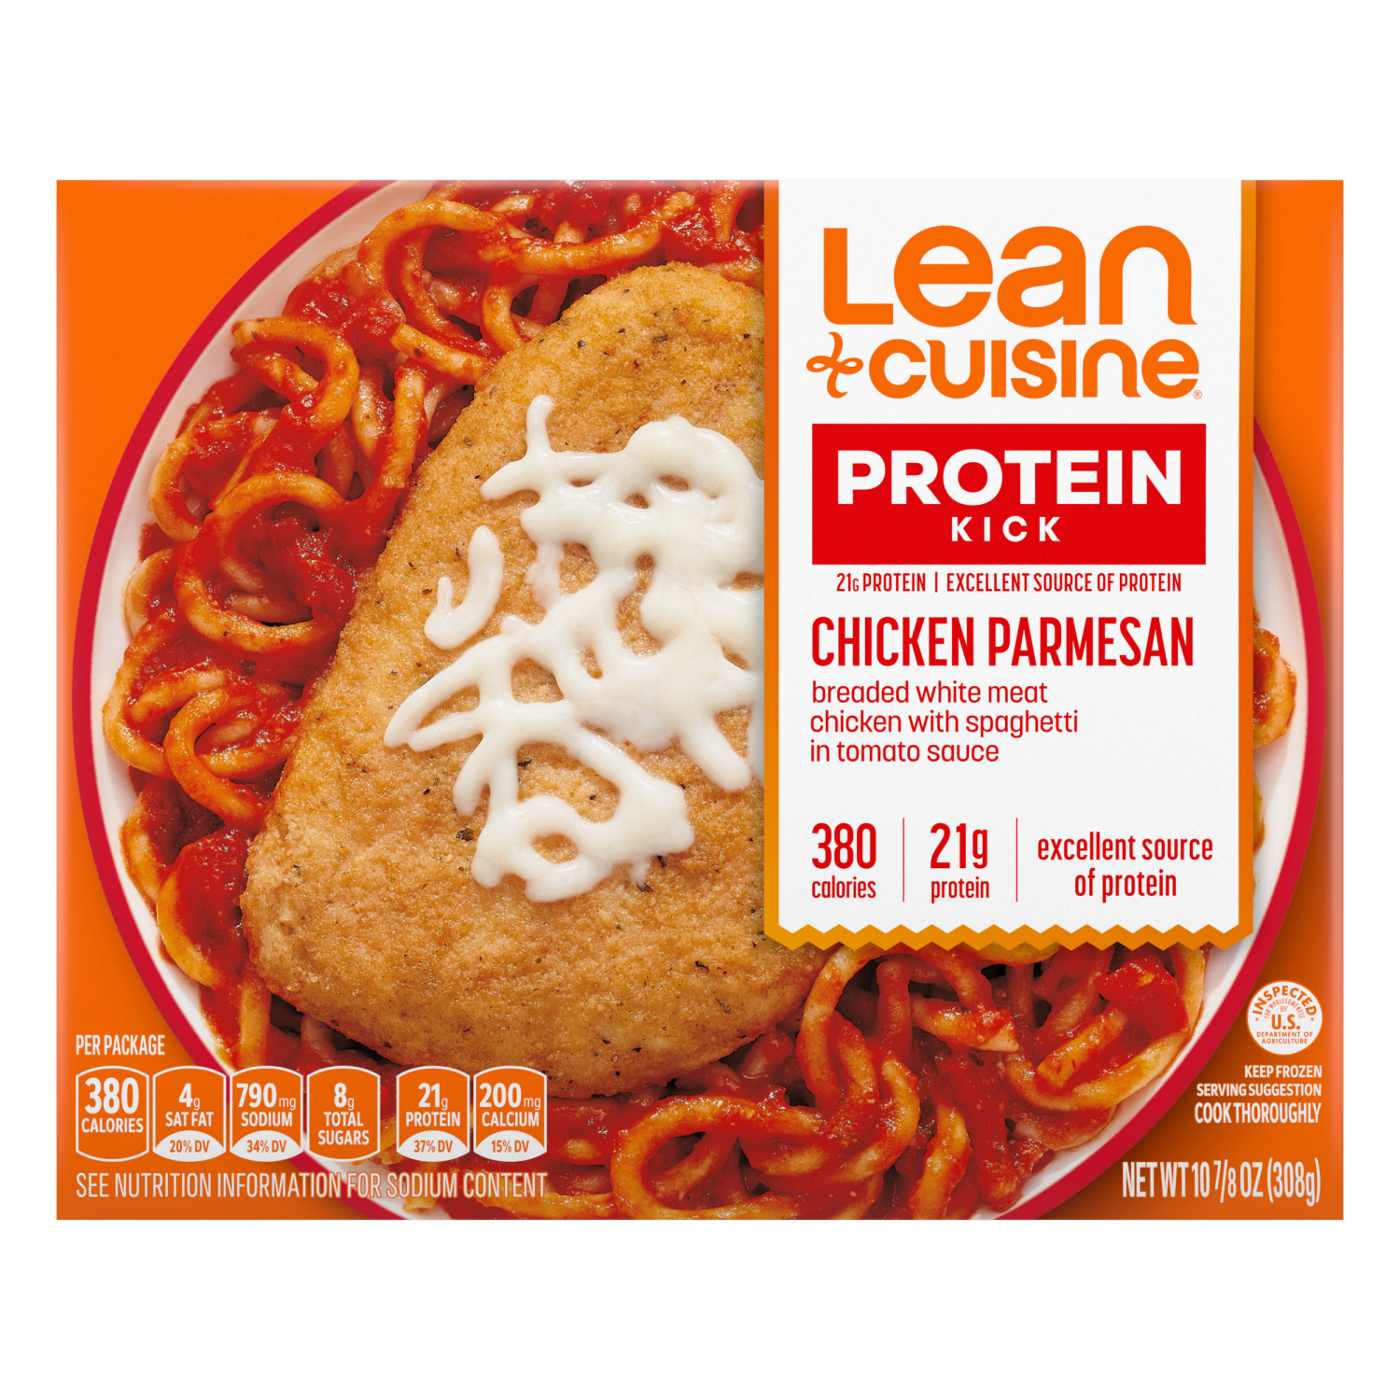 Lean Cuisine 21g Protein Chicken Parmesan Frozen Meal; image 1 of 7